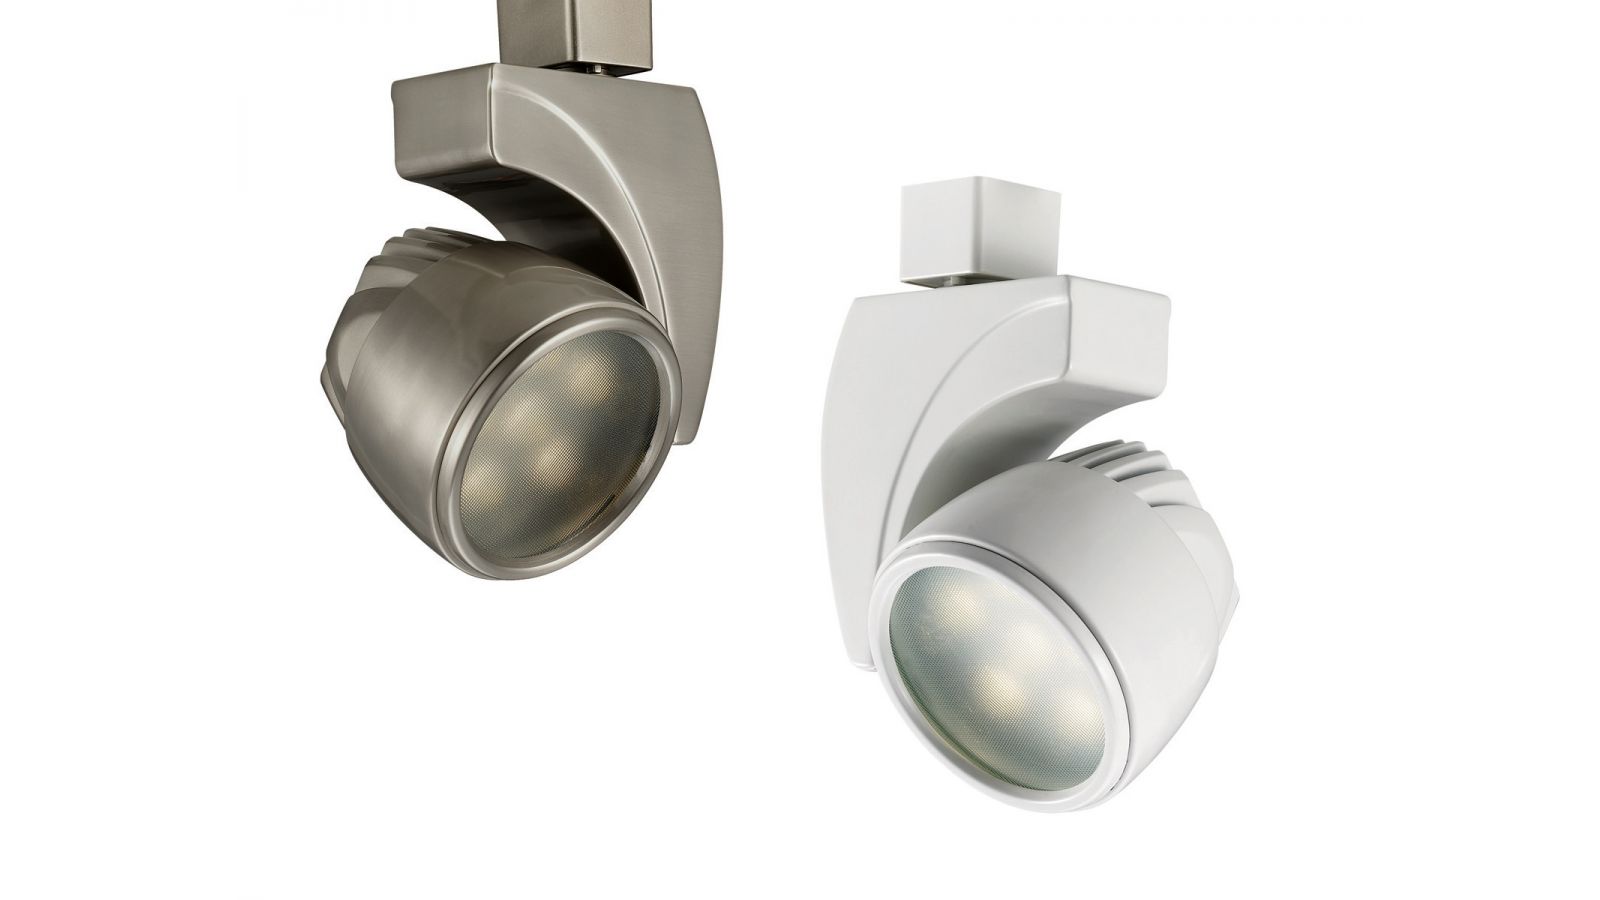 LEDme Reflex Luminaires with Enhanced Lumen Output and Color Temperature Options